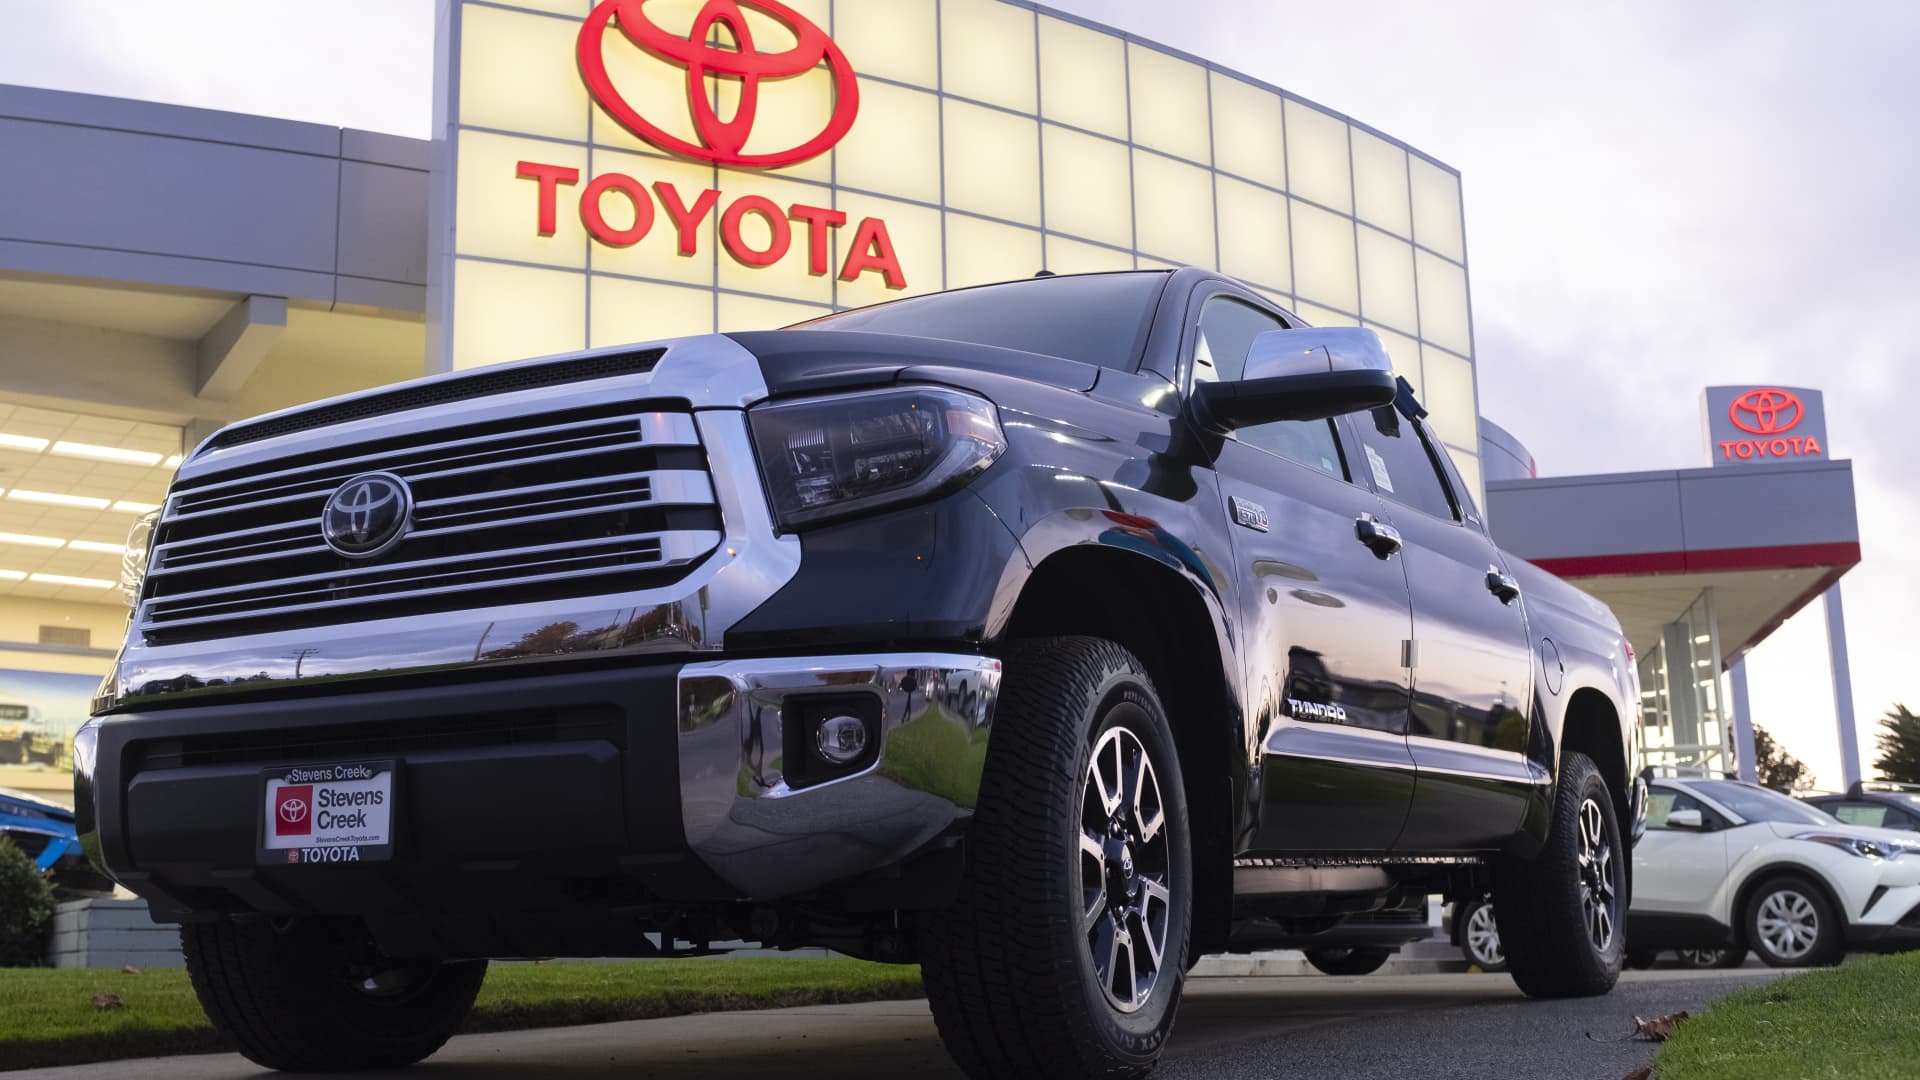 A Toyota Tundra pickup truck is seen at a car dealership in San Jose, California.